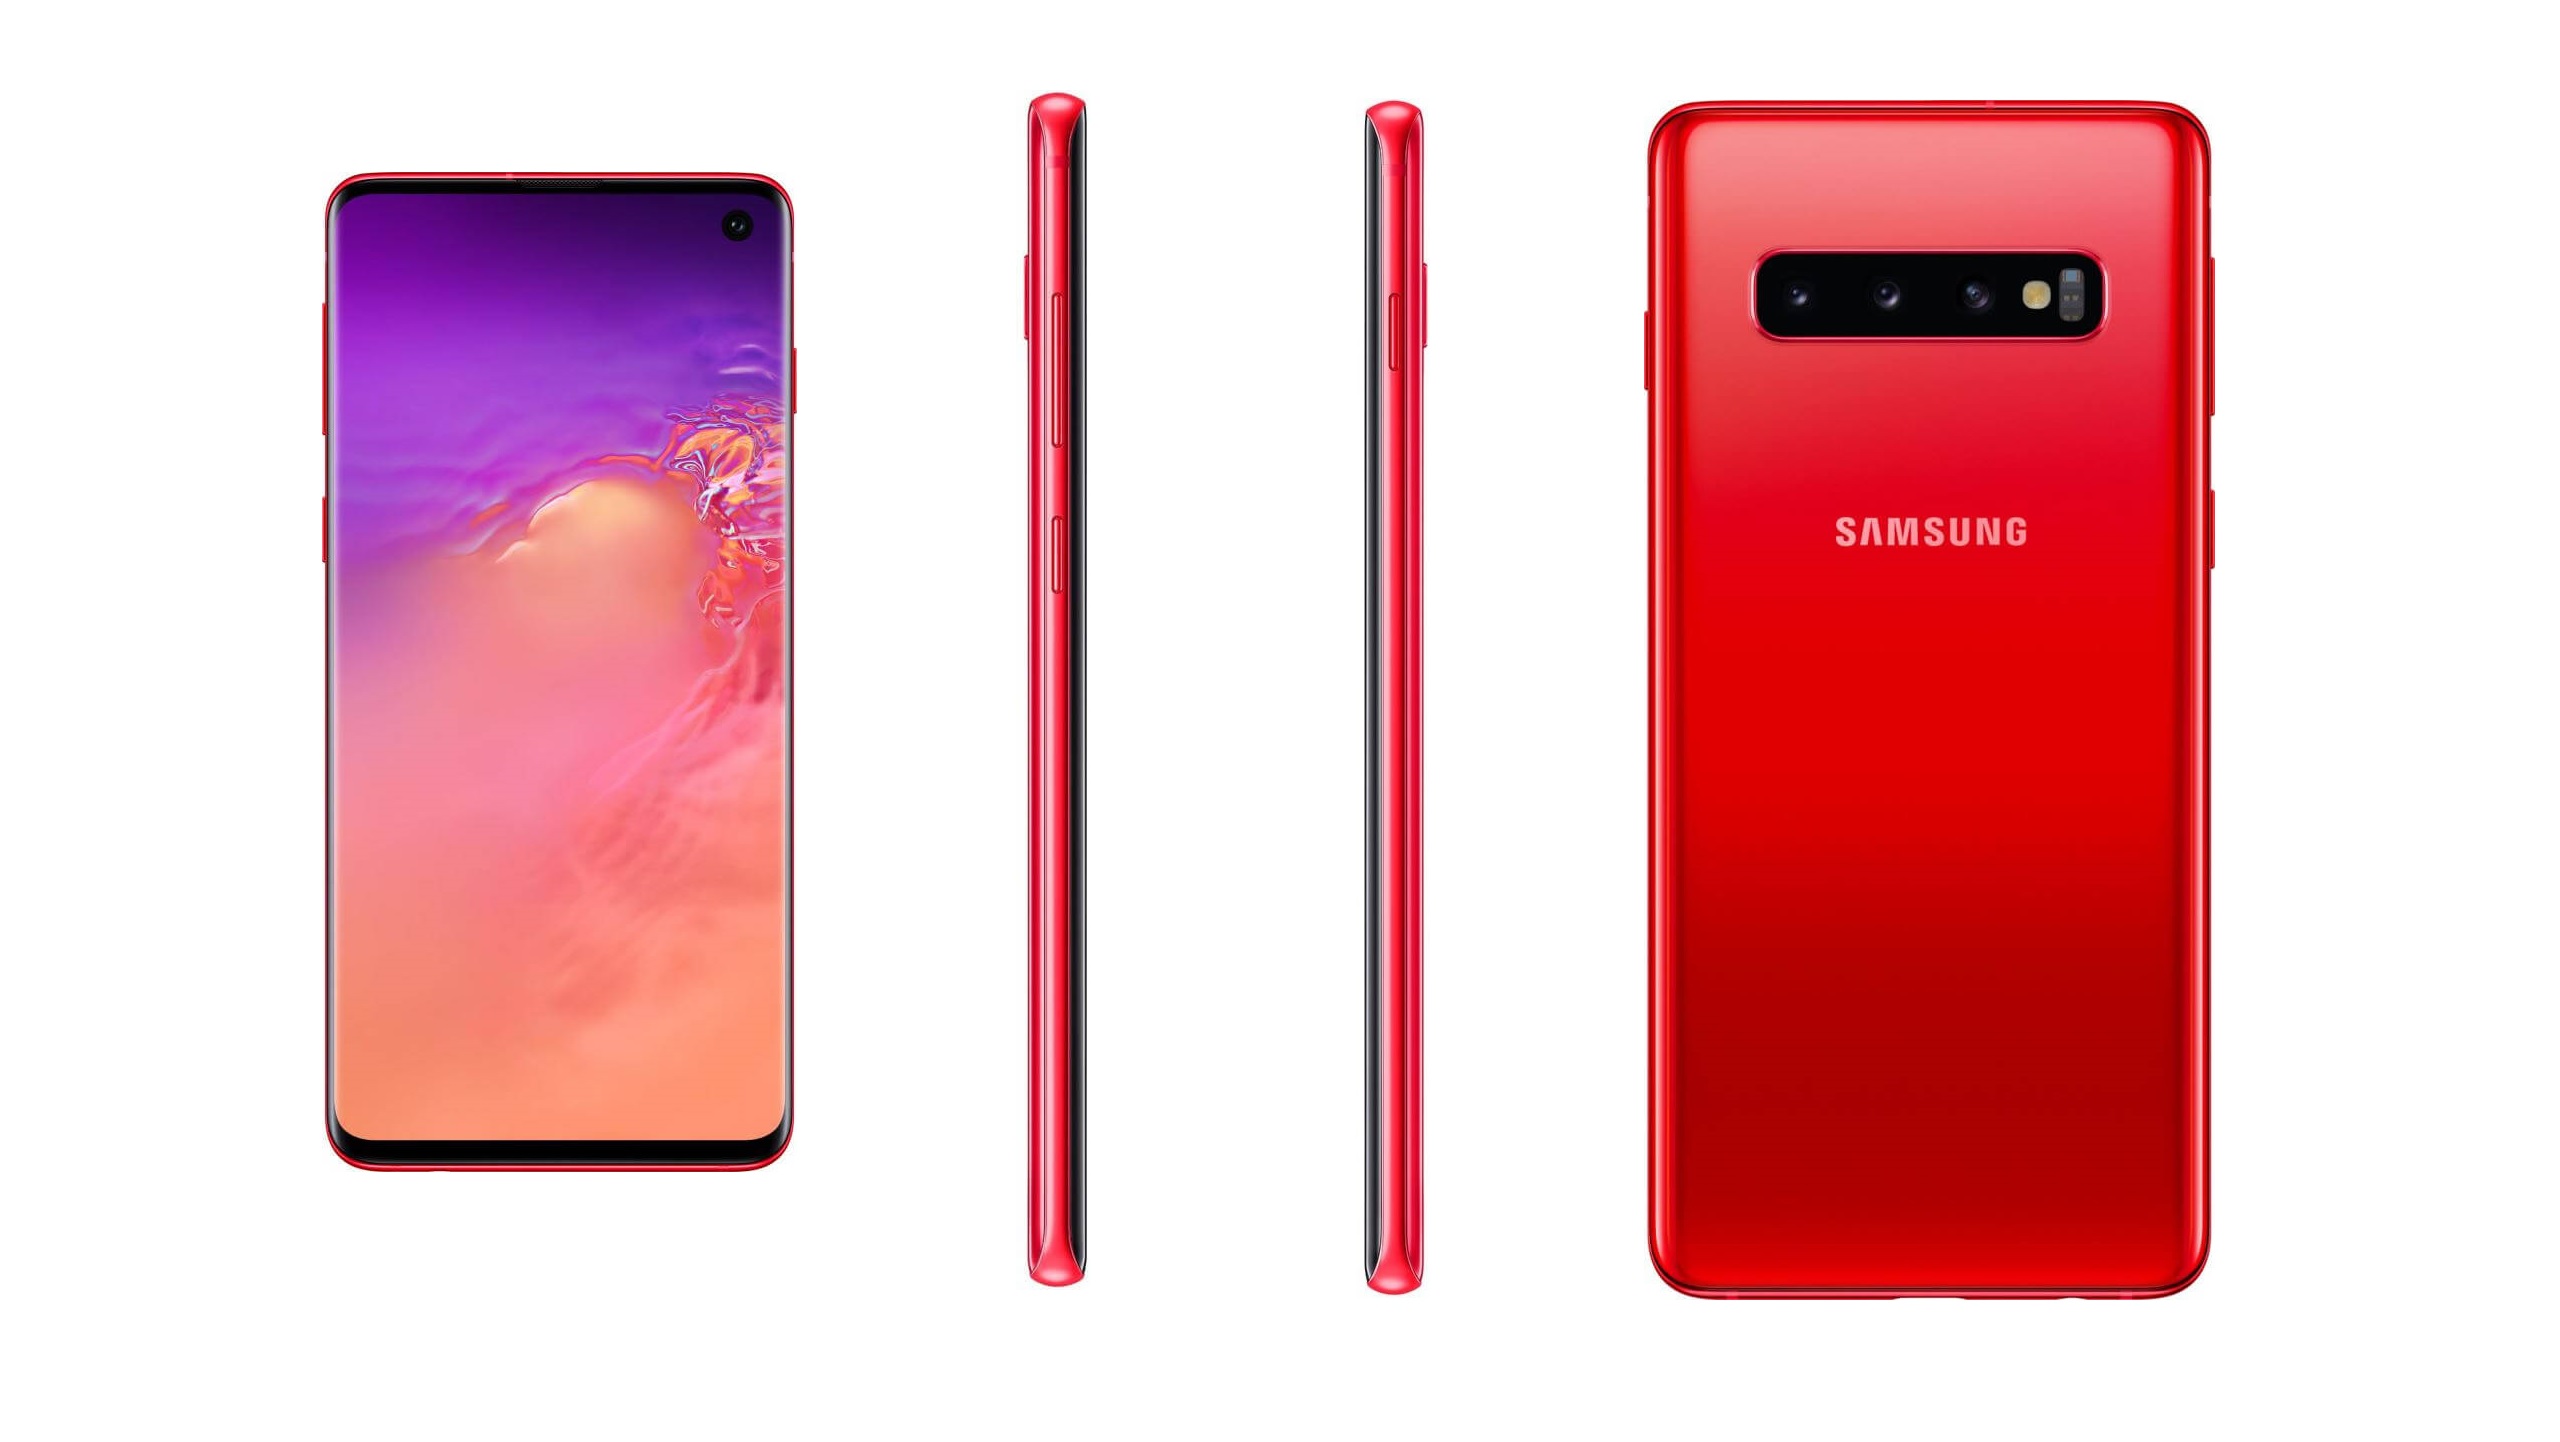 Samsung Galaxy S10 and S10+ to come in new Cardinal Red